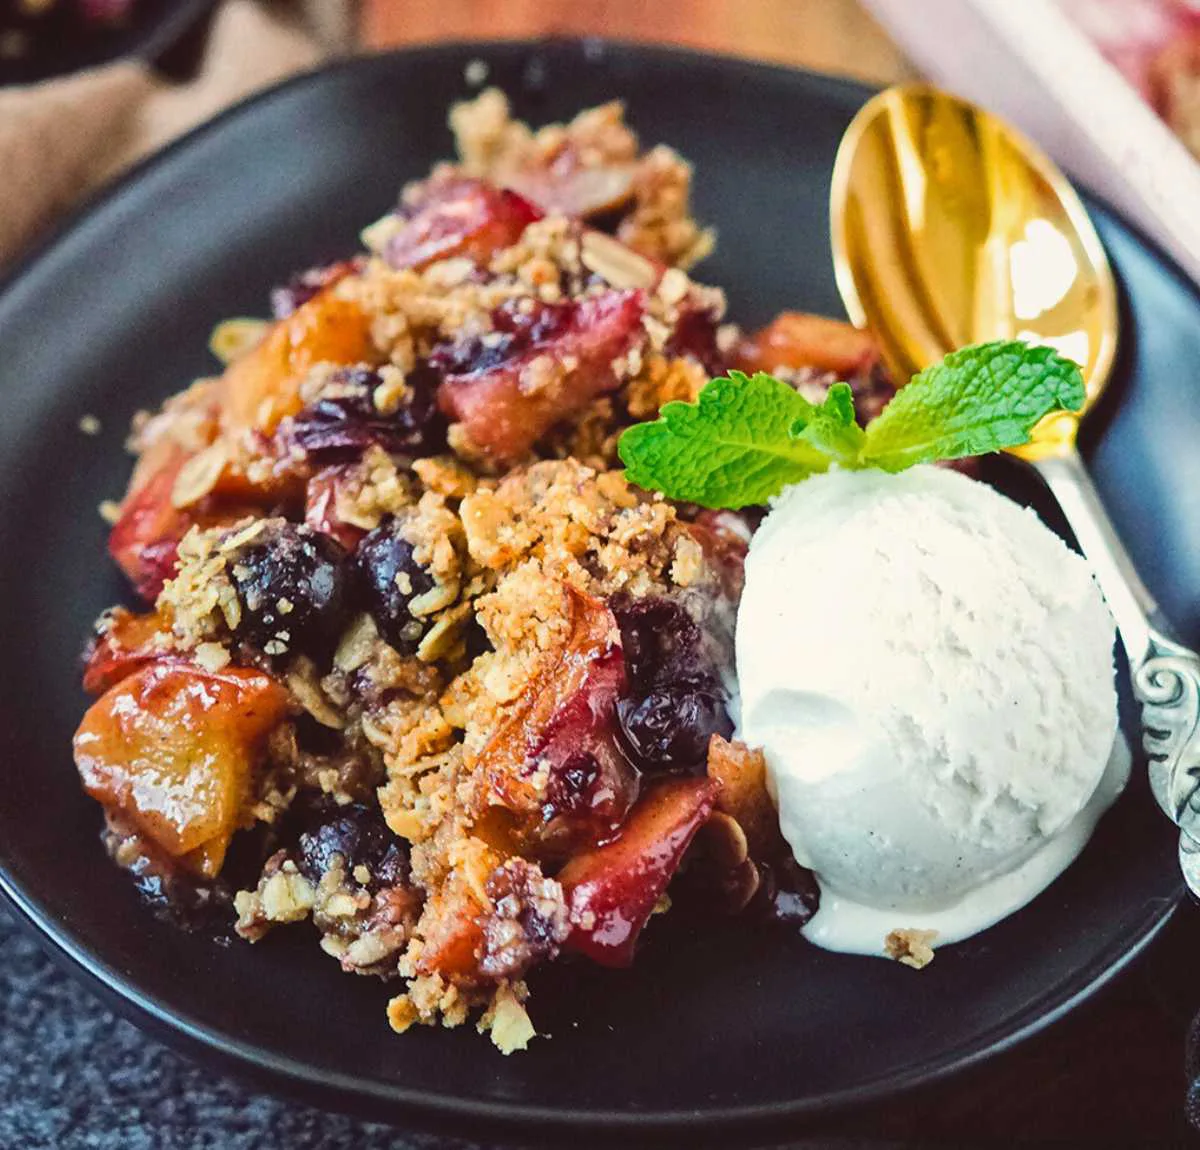 apple blueberry crumble featured image